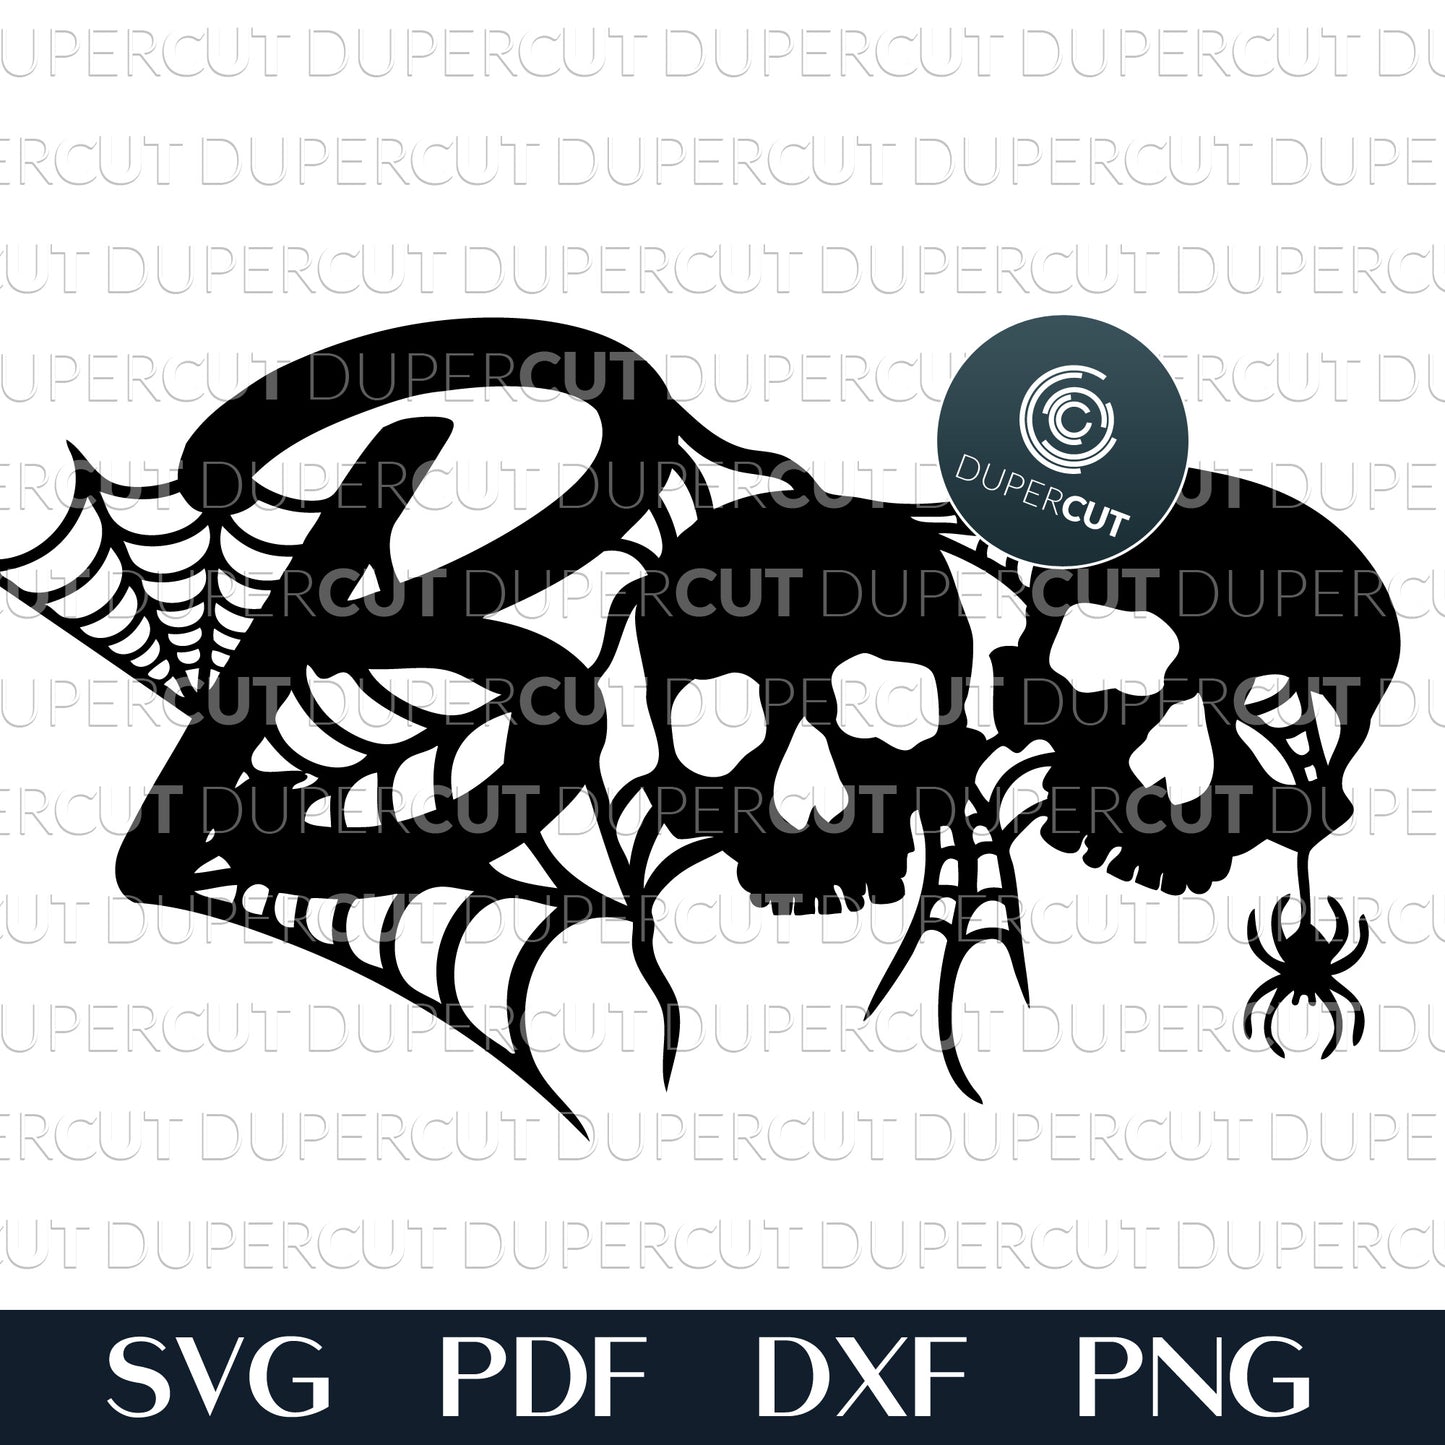 Halloween illustration - Boo skulls with spider web SVG PDF DXF commercial use vector cutting files for Glowroge, Cricut, laser engraving, print on demand